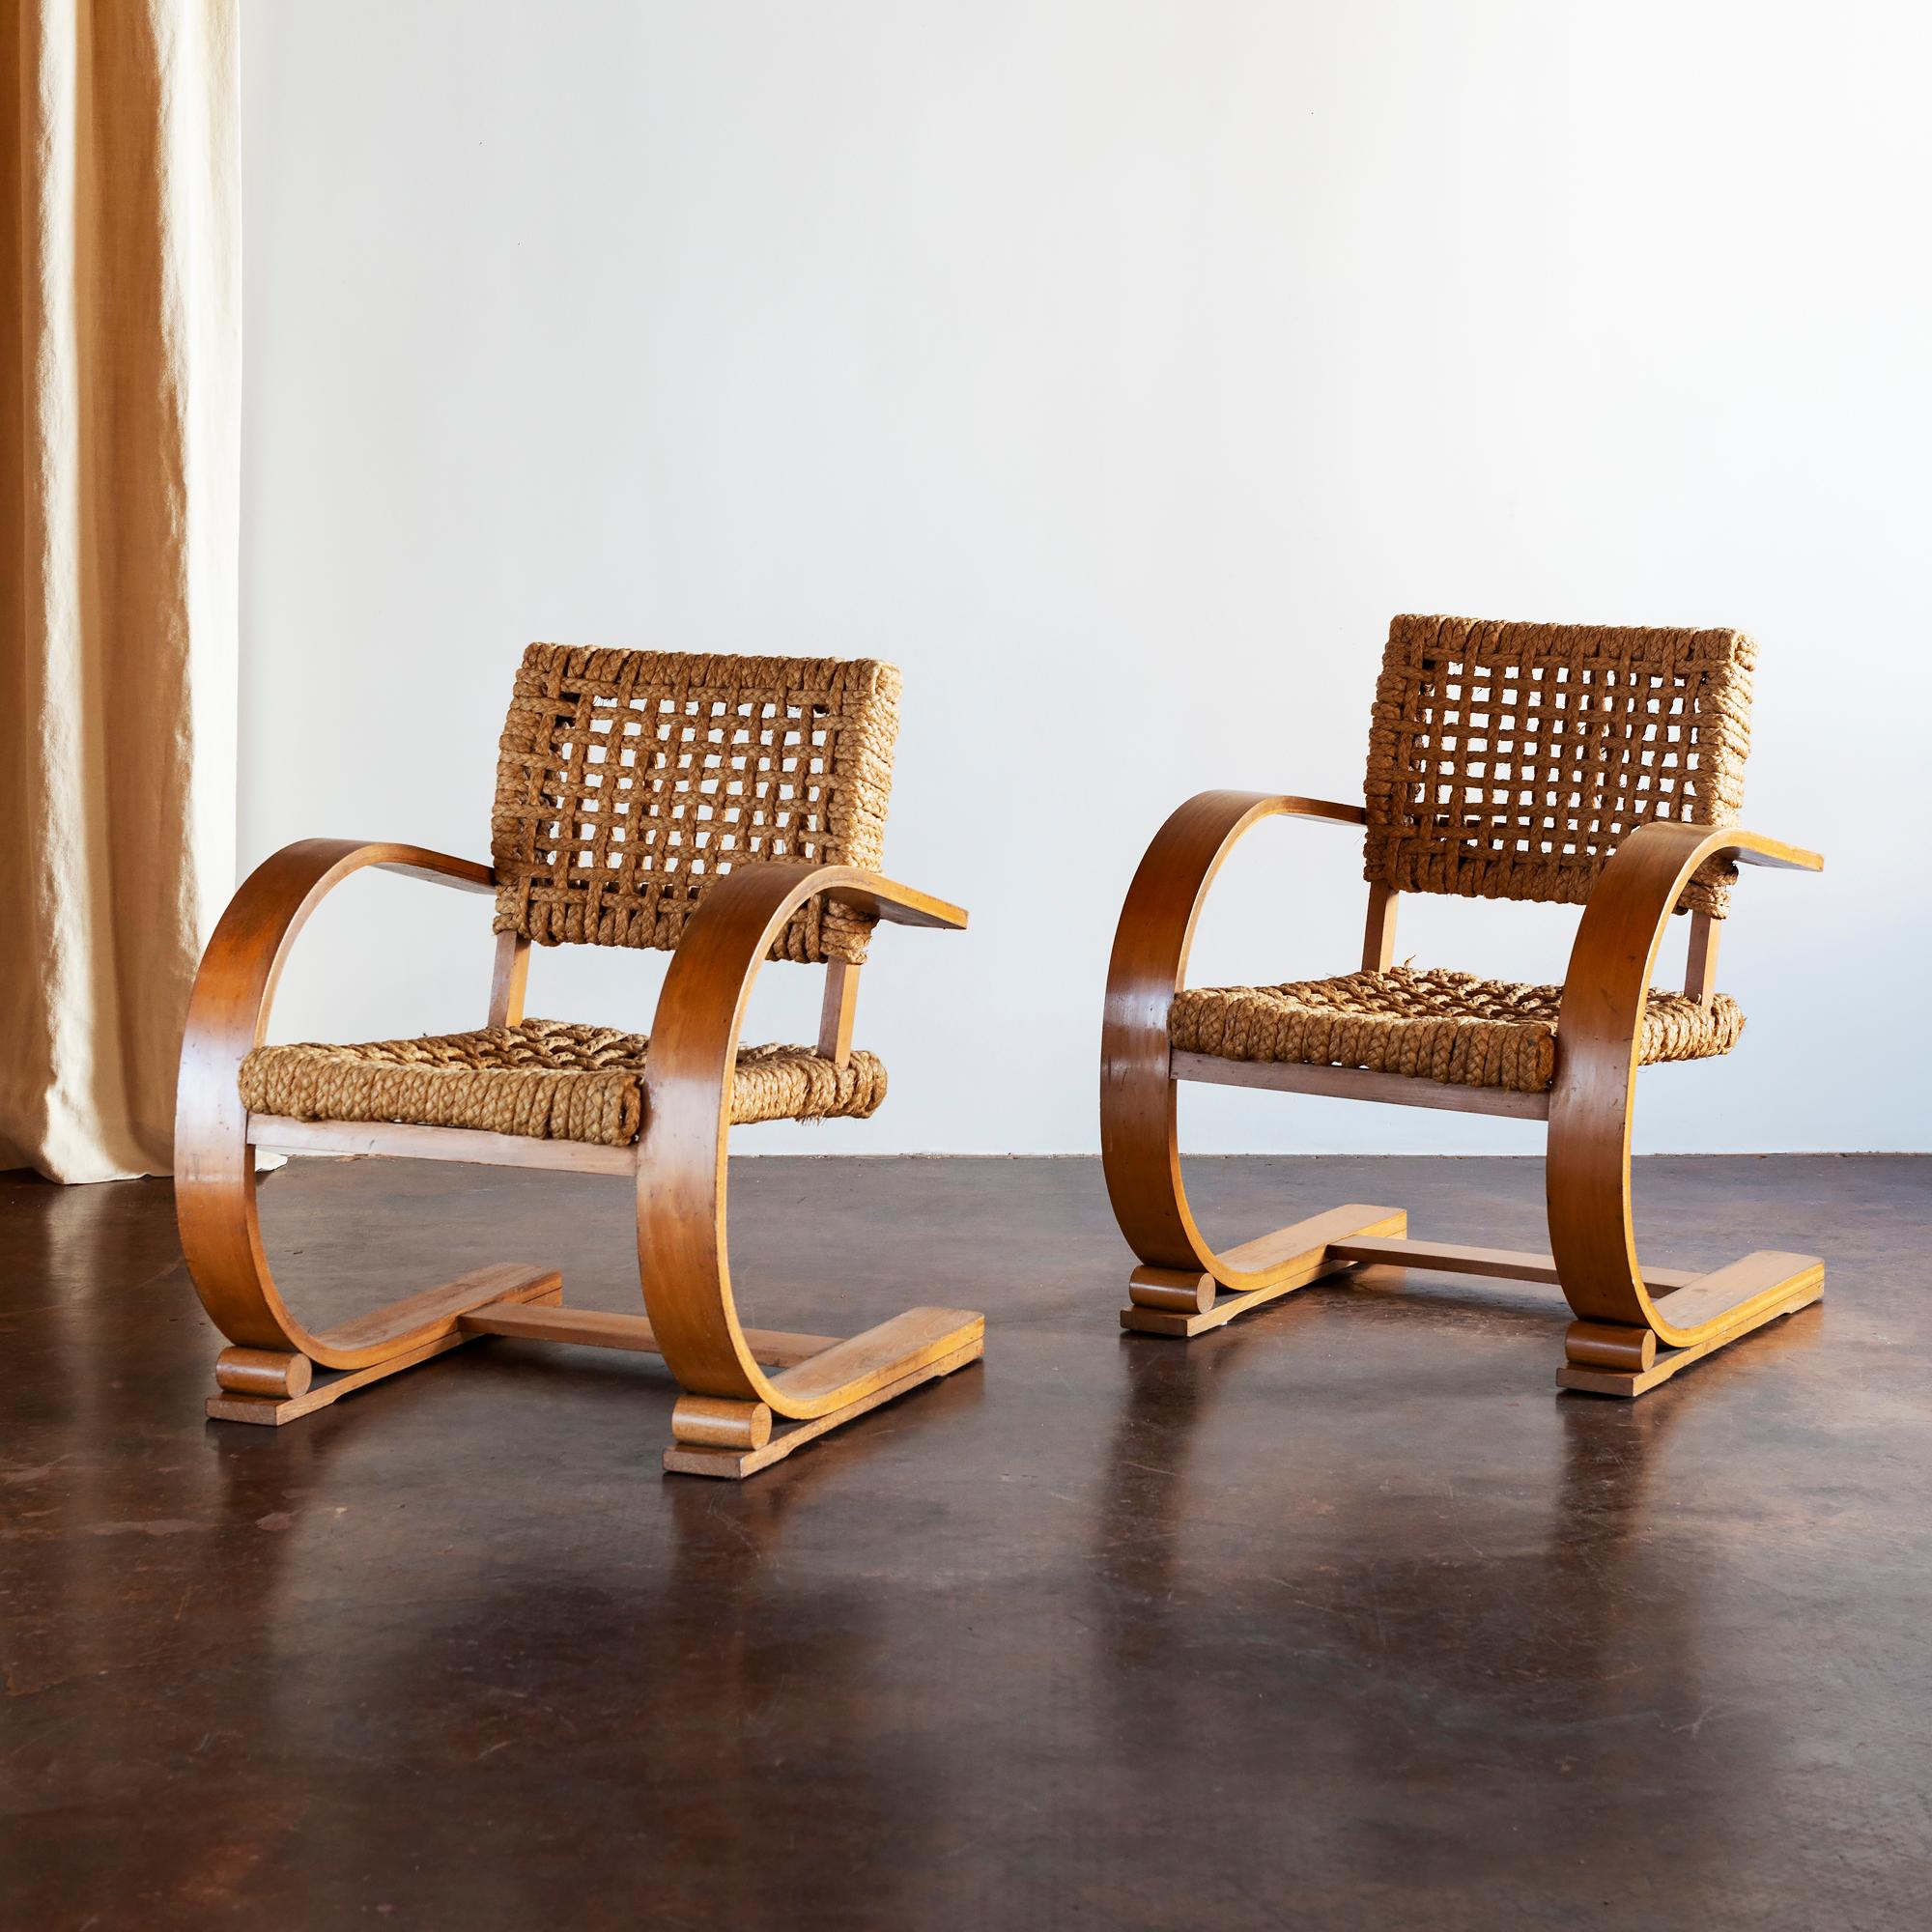 Pair of elegant easy chairs in bent beech and original braided rope by Adrien Audoux and Frida Minet. France, 1940s.